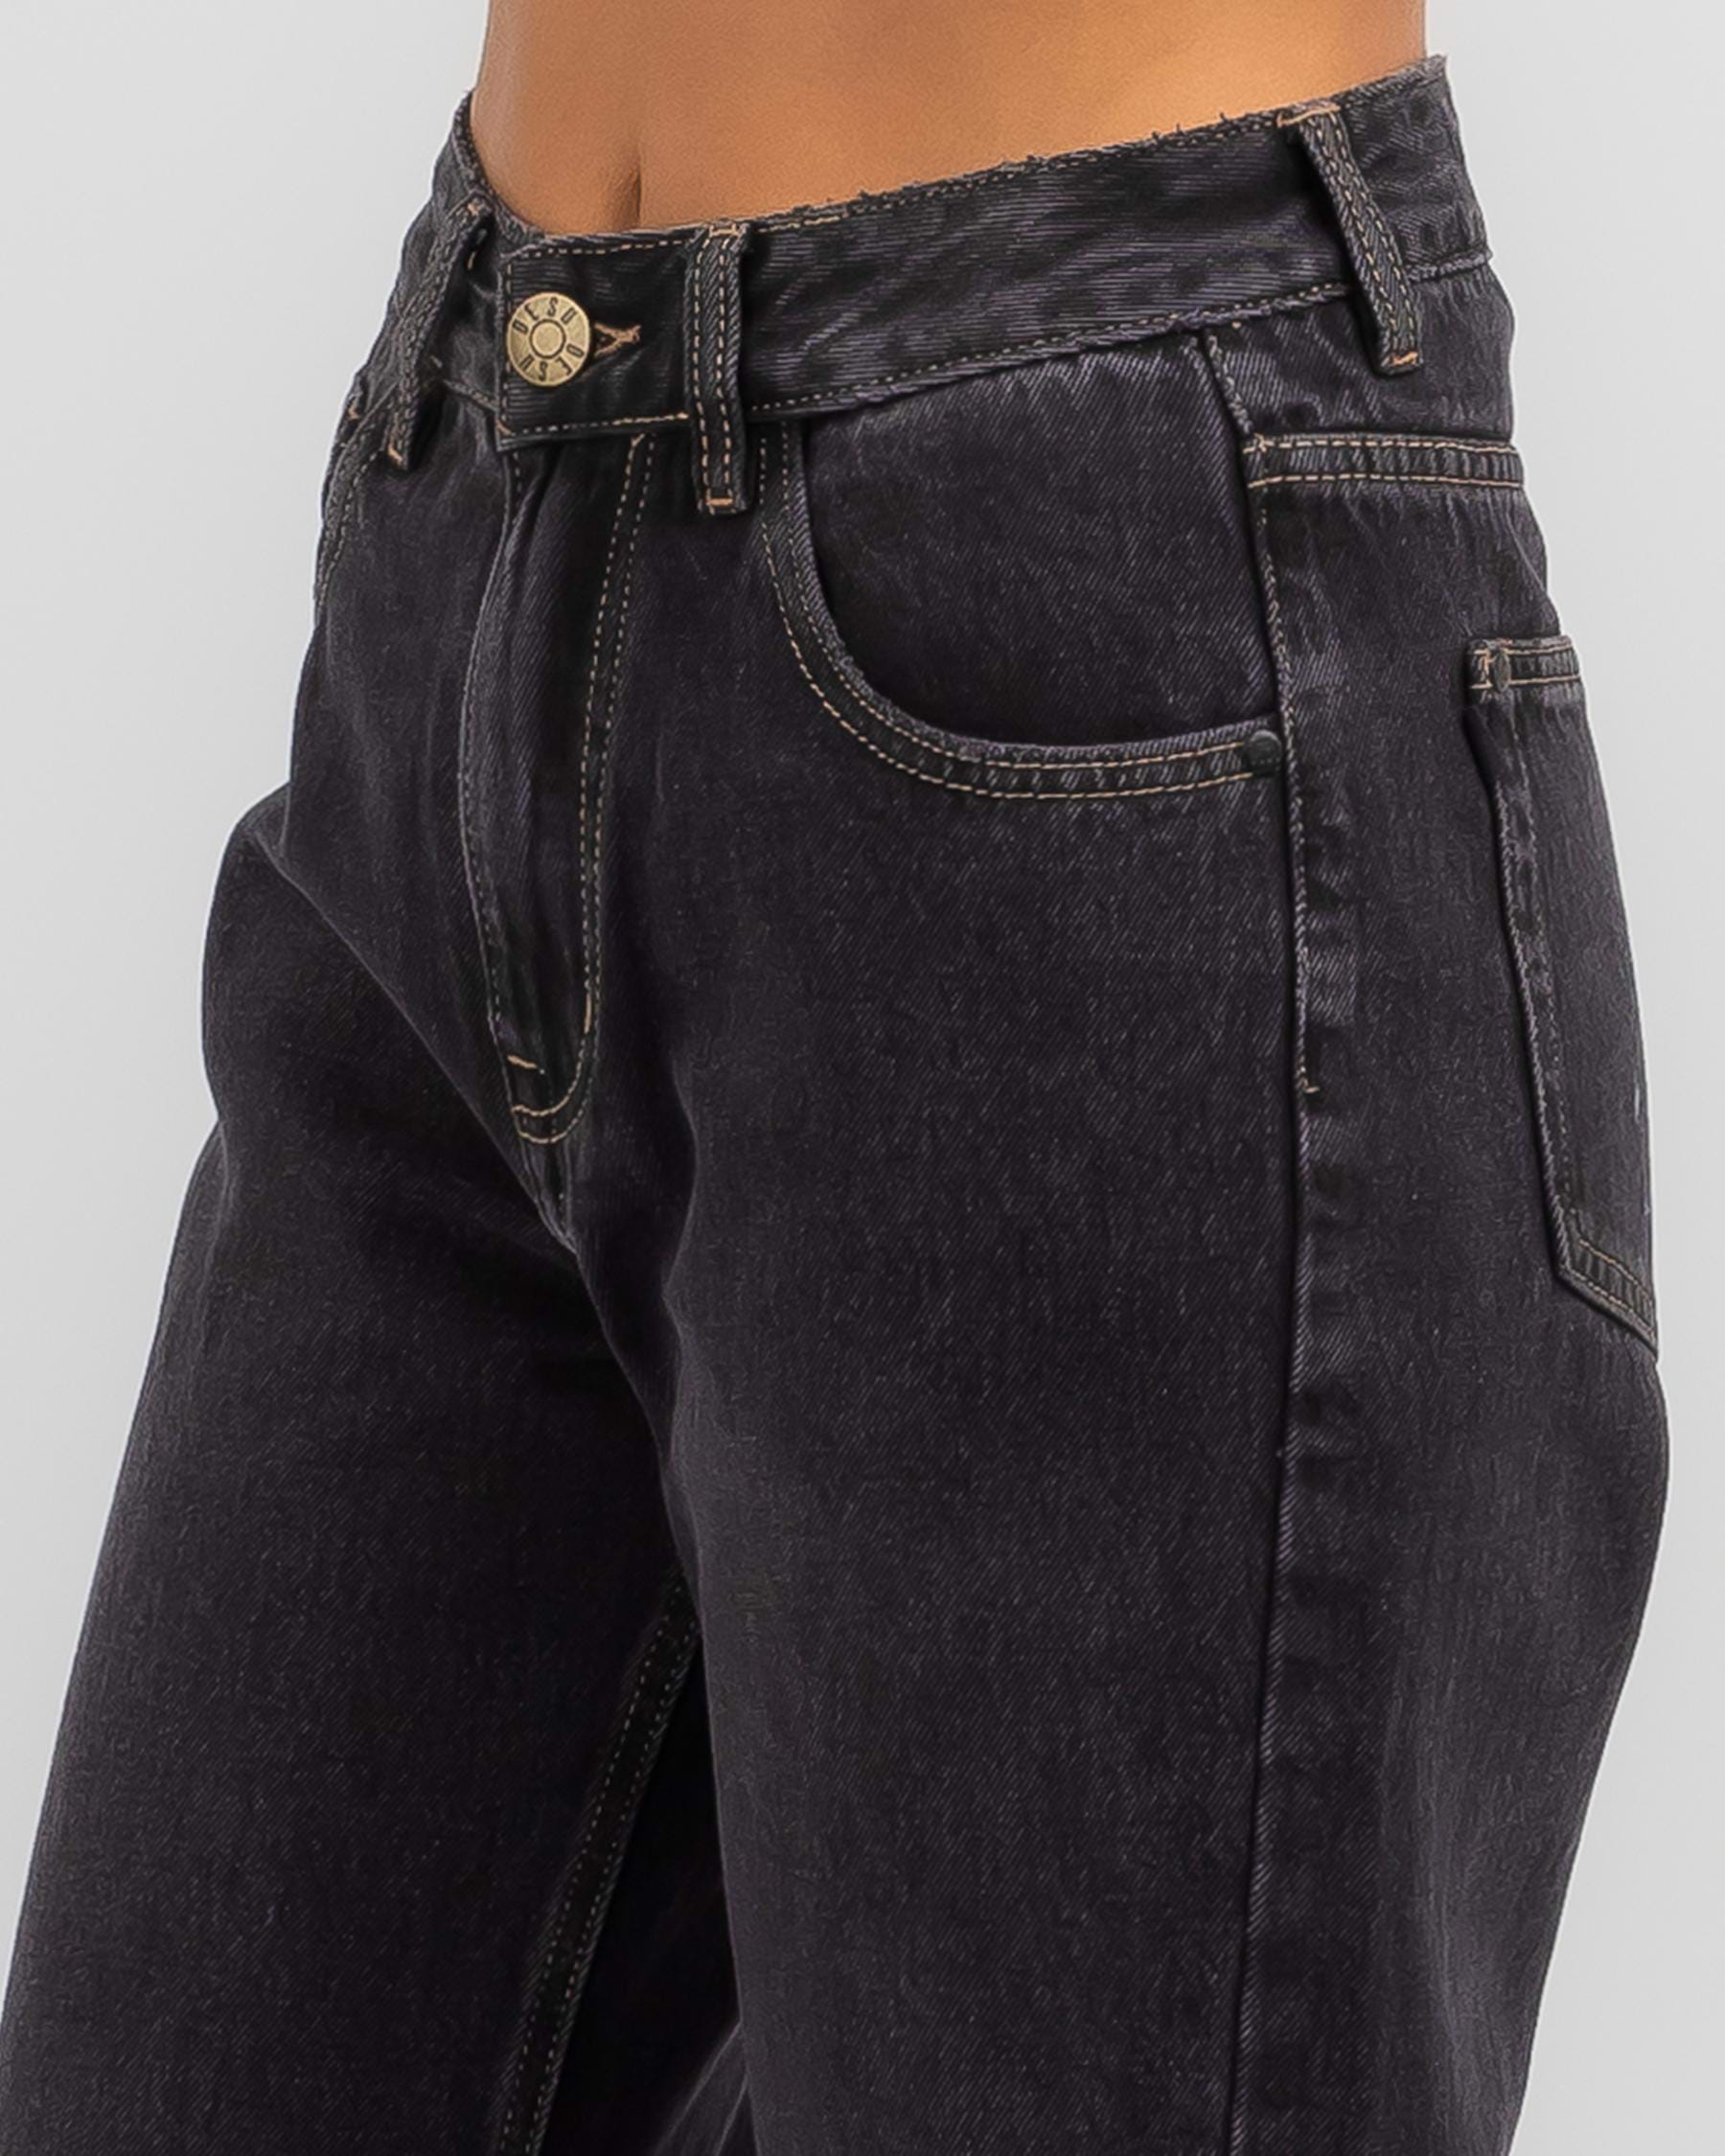 DESU Jagger Jeans In Washed Black - Fast Shipping & Easy Returns - City ...